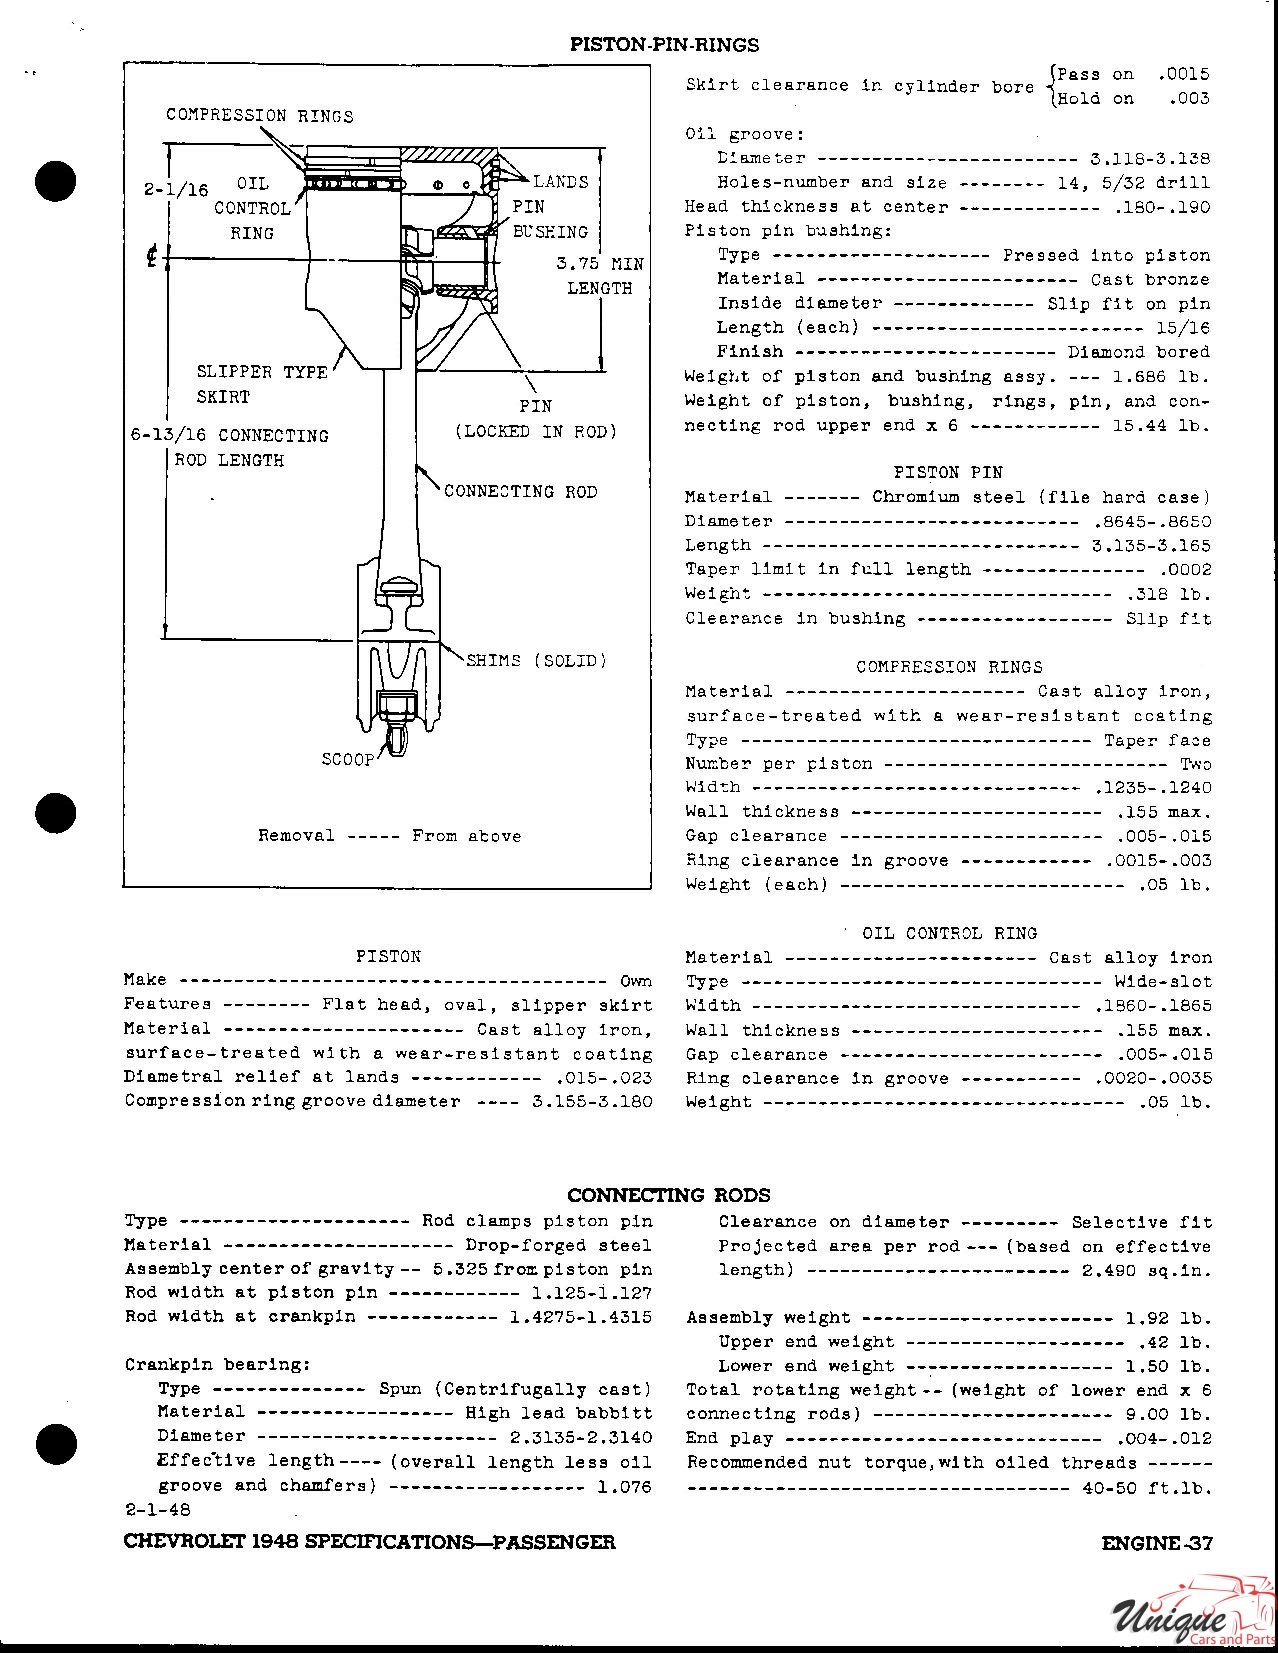 1948 Chevrolet Specifications Page 28